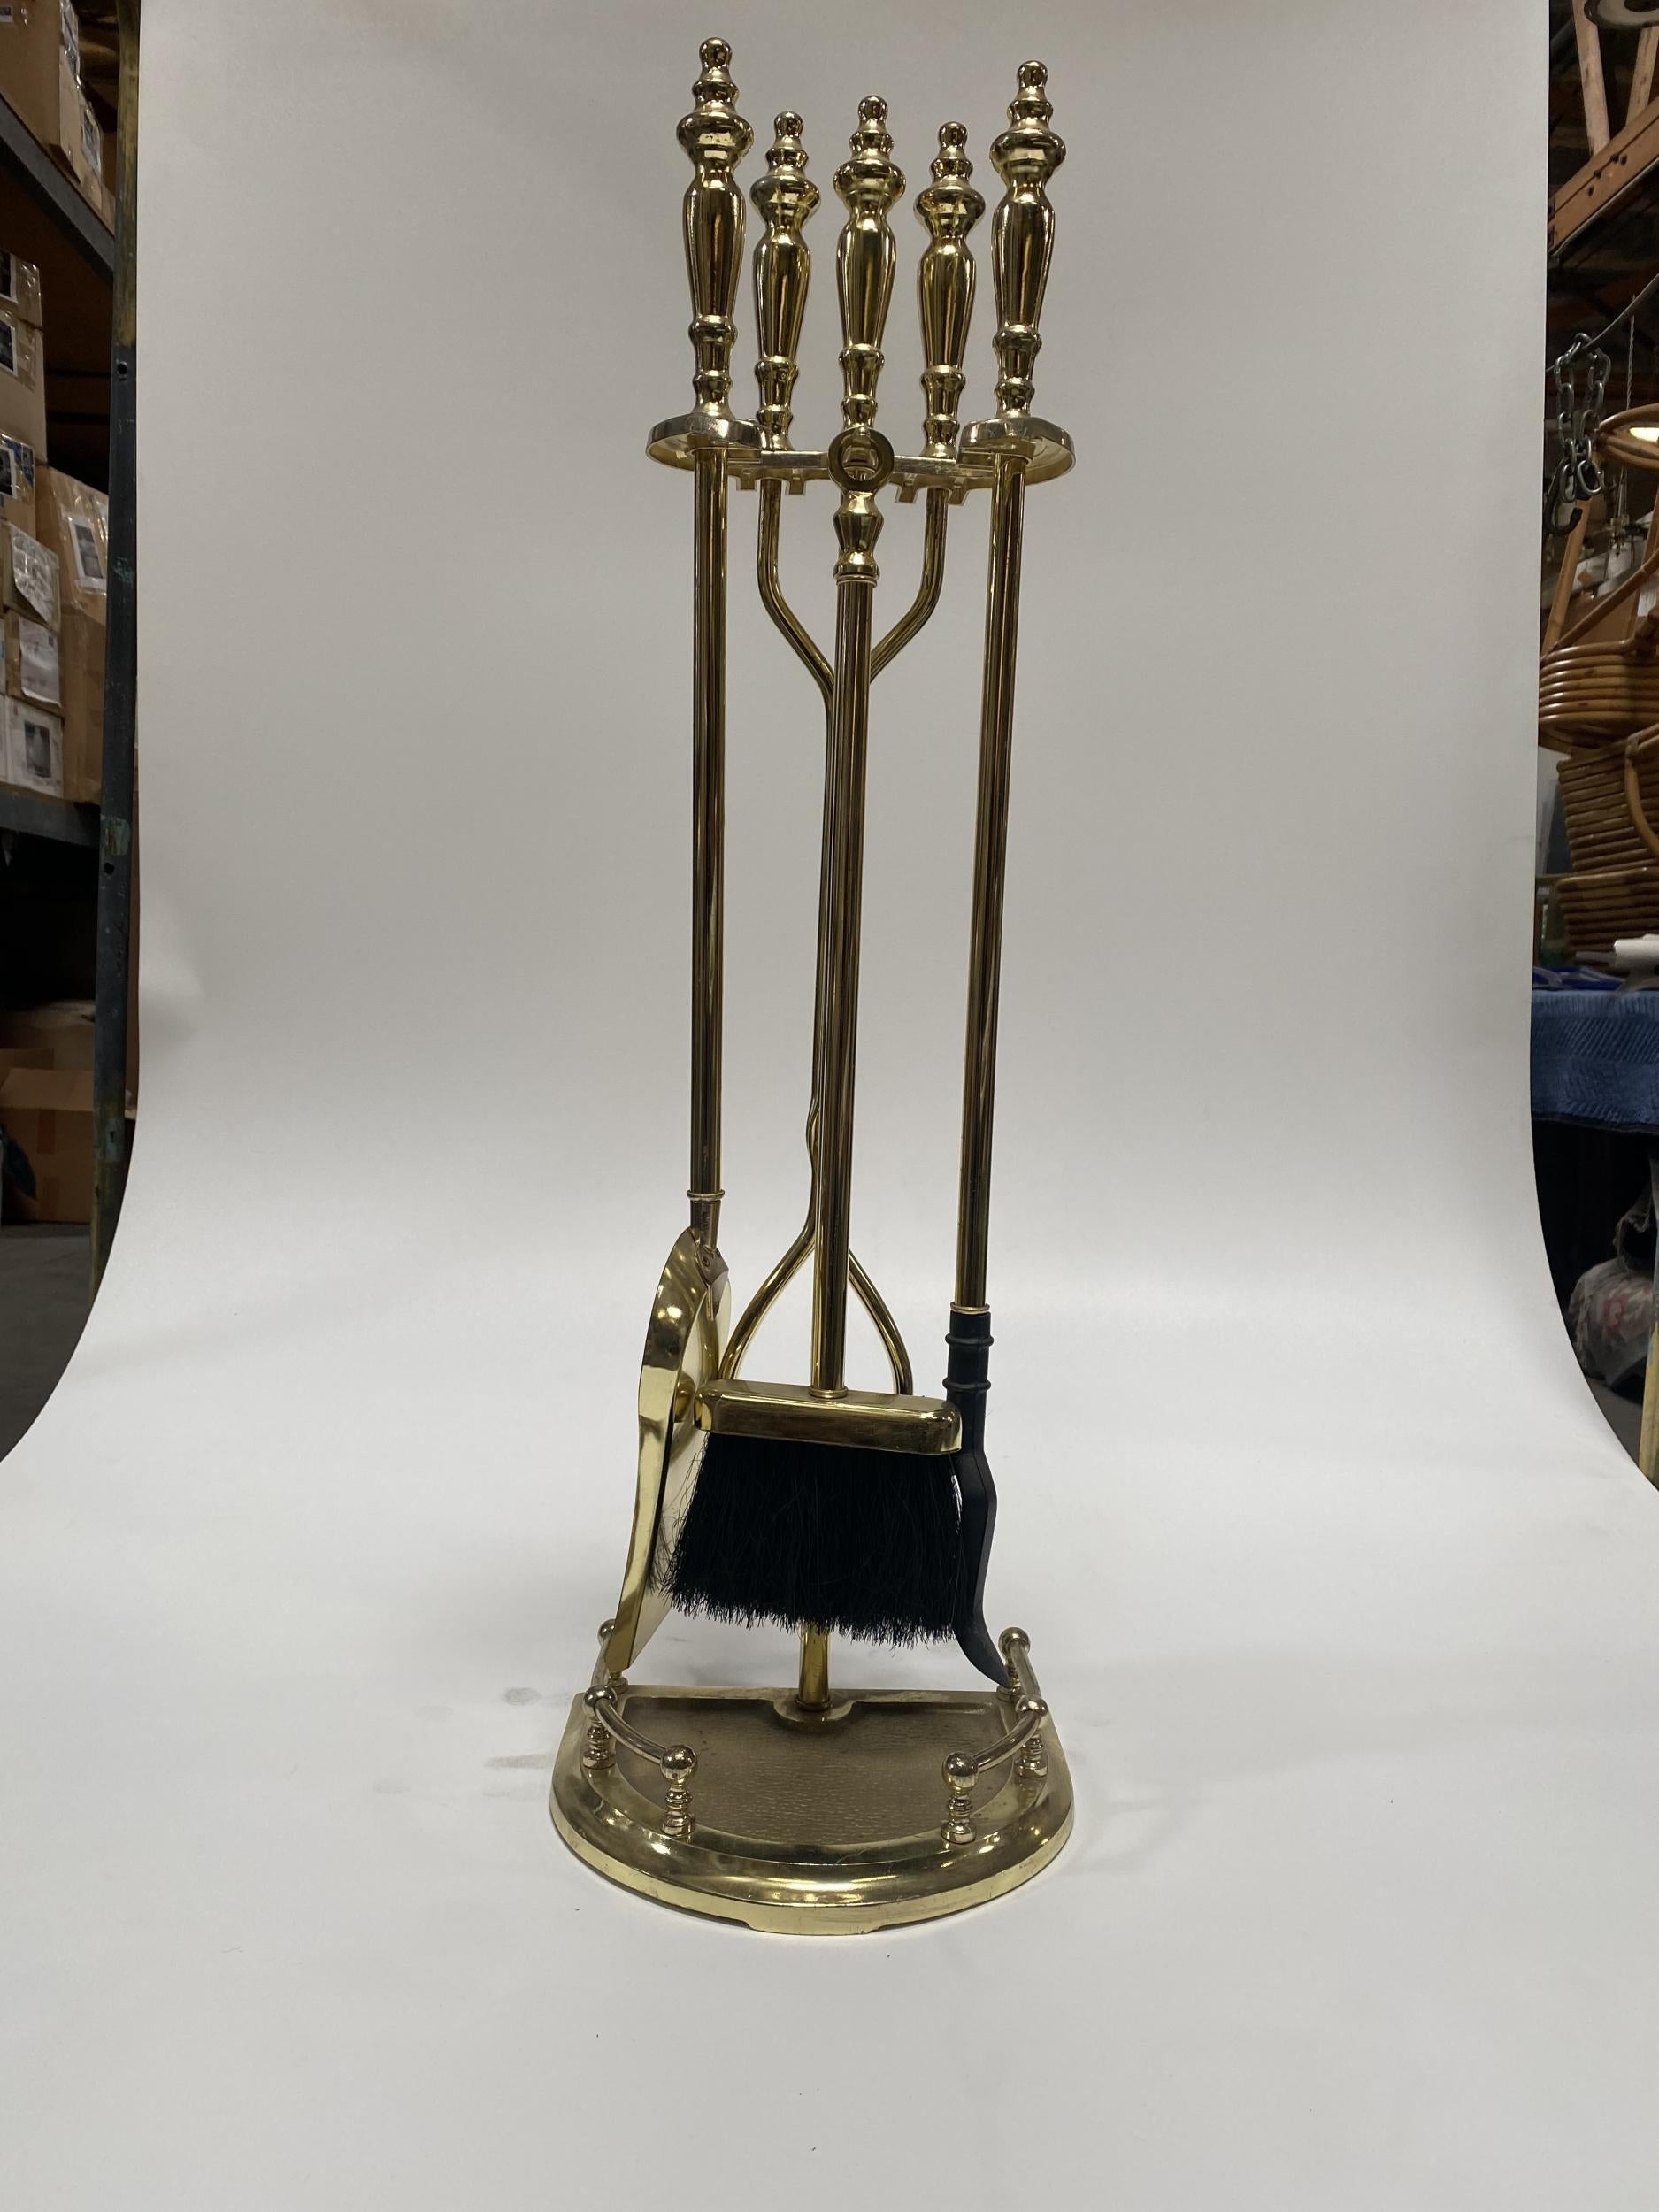 Vintage 1950s Colonial Fireplace solid brass tool set featuring a stand, brush, poker, shovel, and tongs.